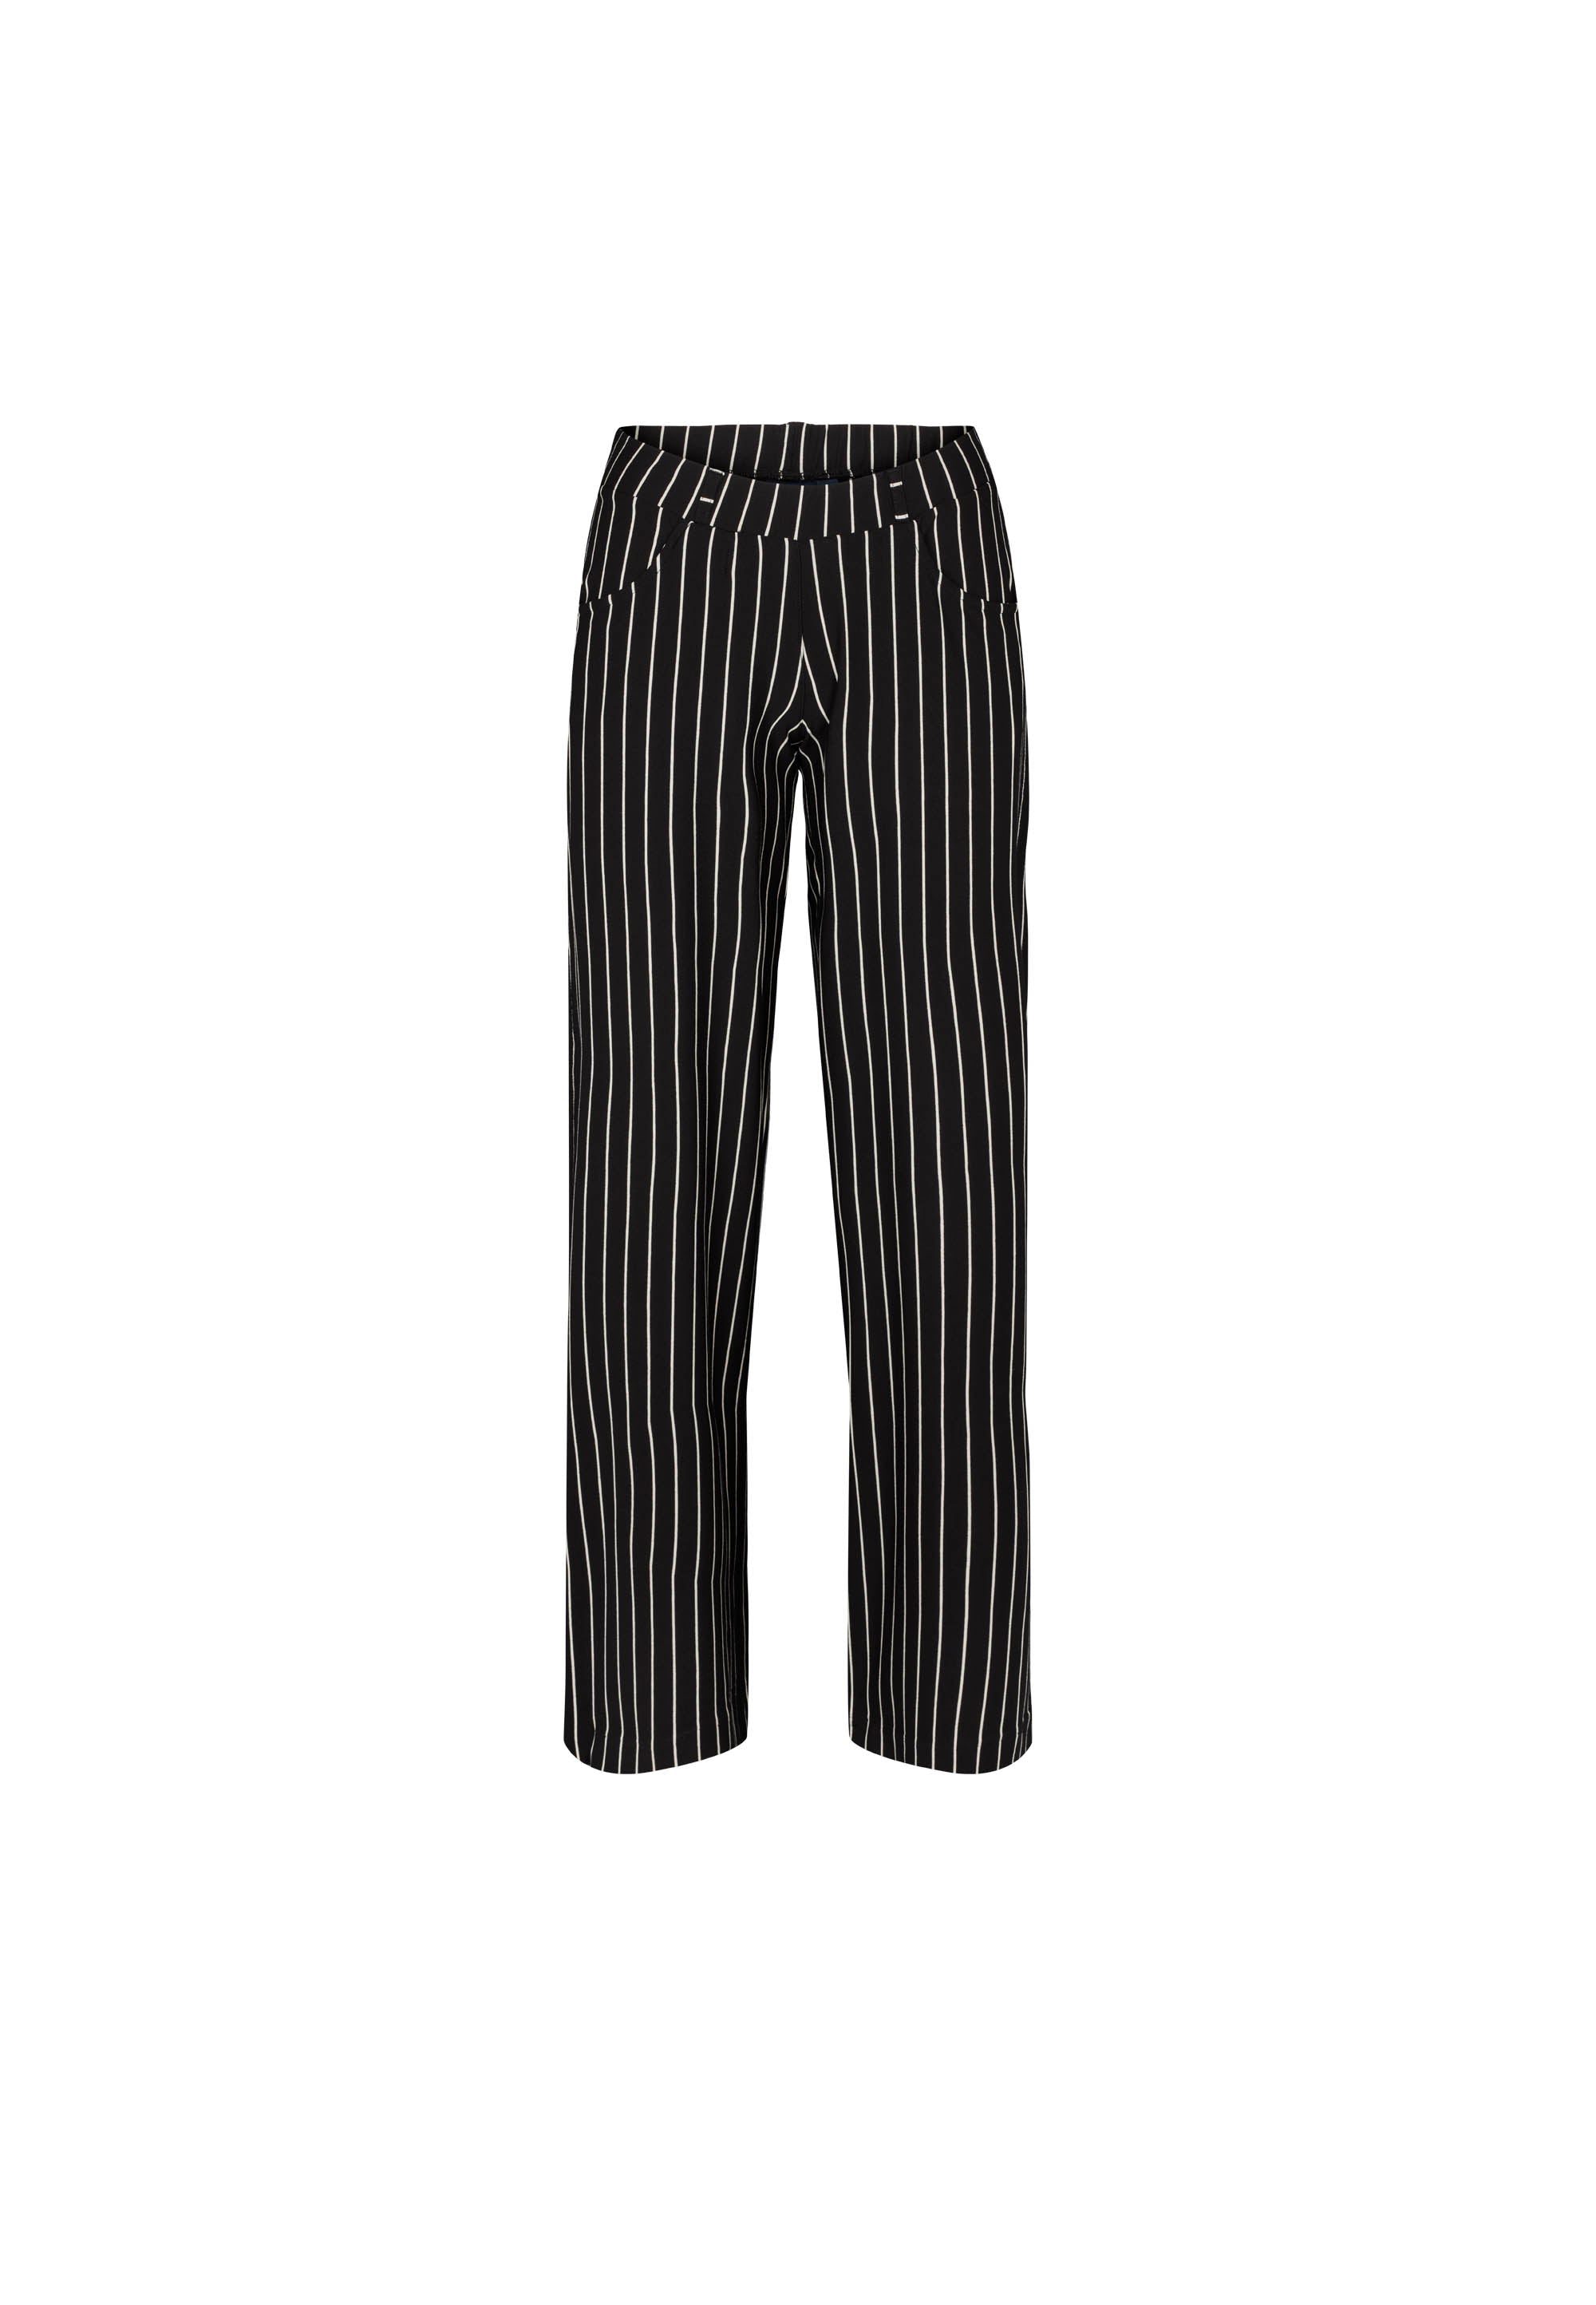 LAURIE Donna Loose Jersey - Short Length Trousers LOOSE 99222 Black Stripe